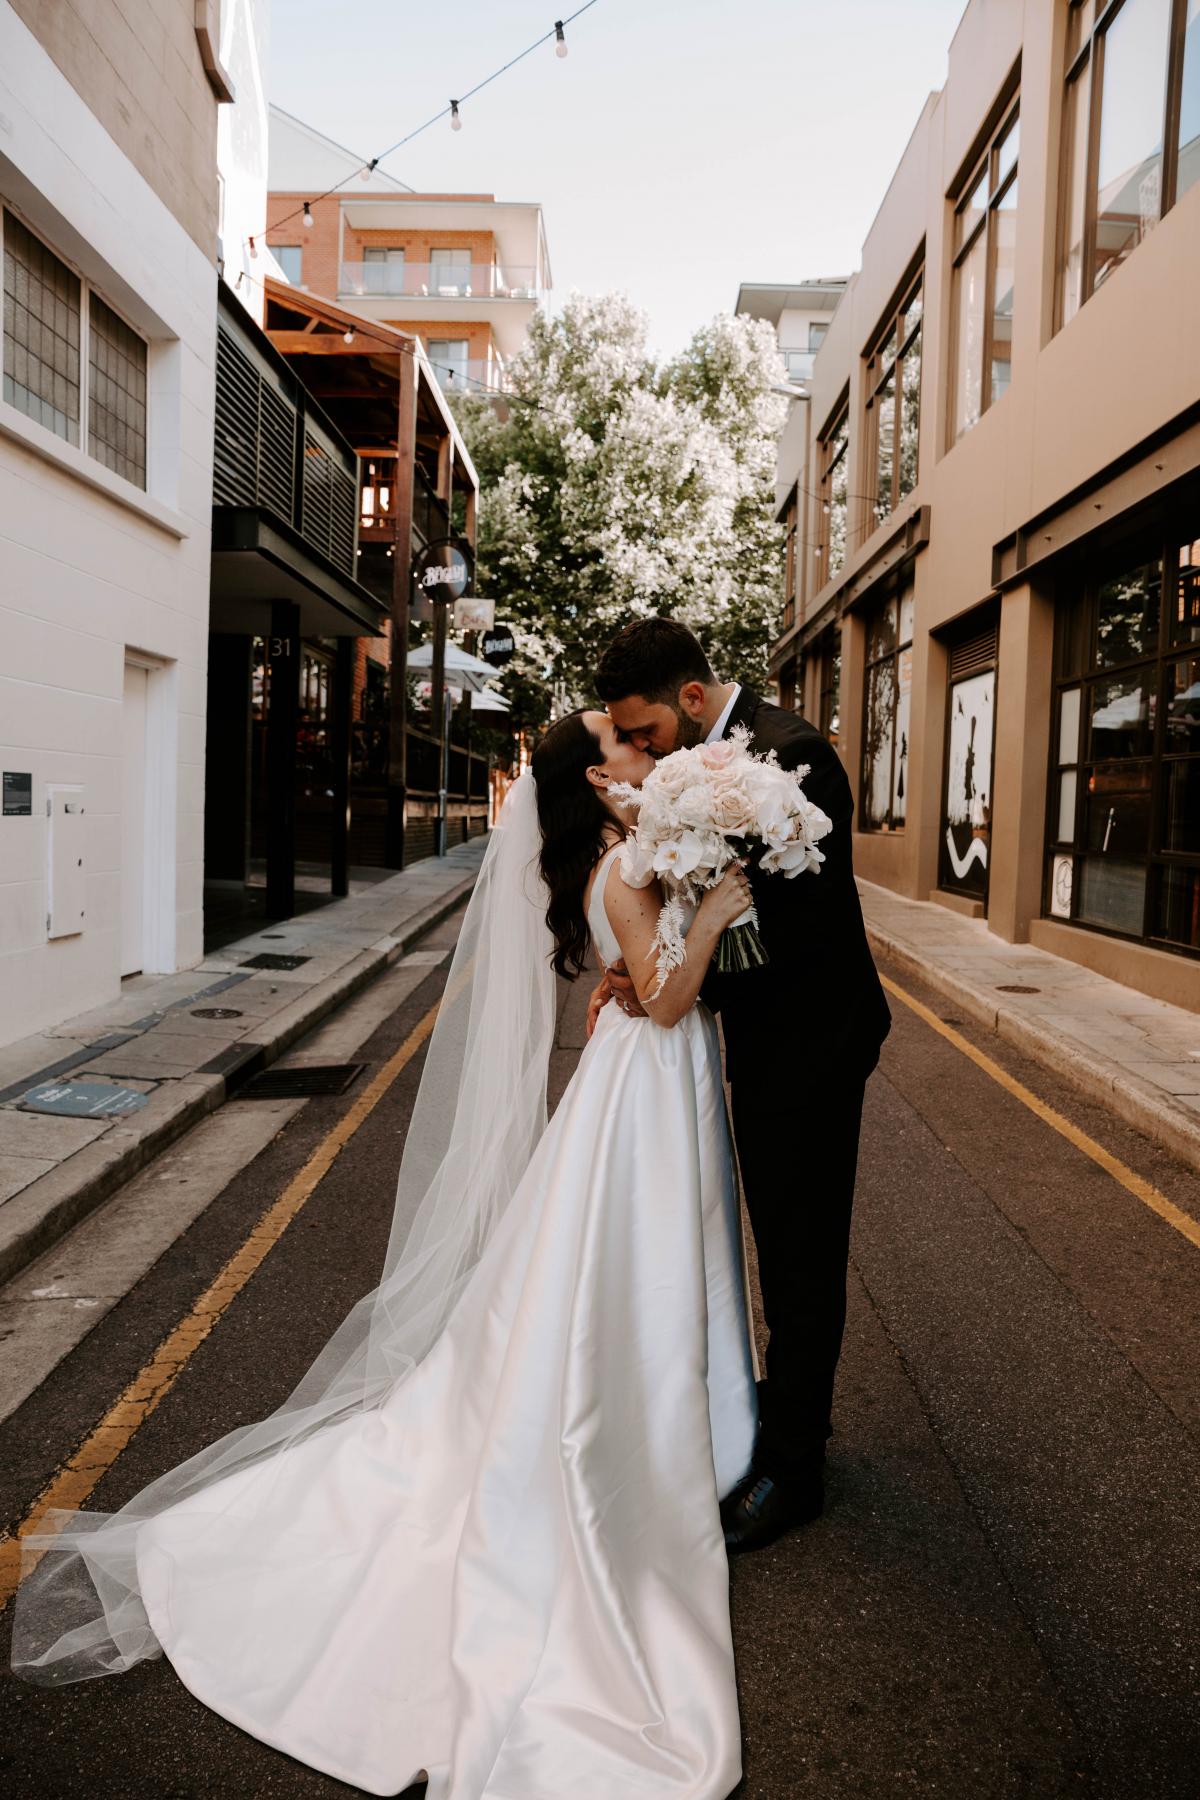 KWH real bride Shenea kissing in the streets with her new husband Lain. She wears the simple elegant Taryn Camille gown by KWH.